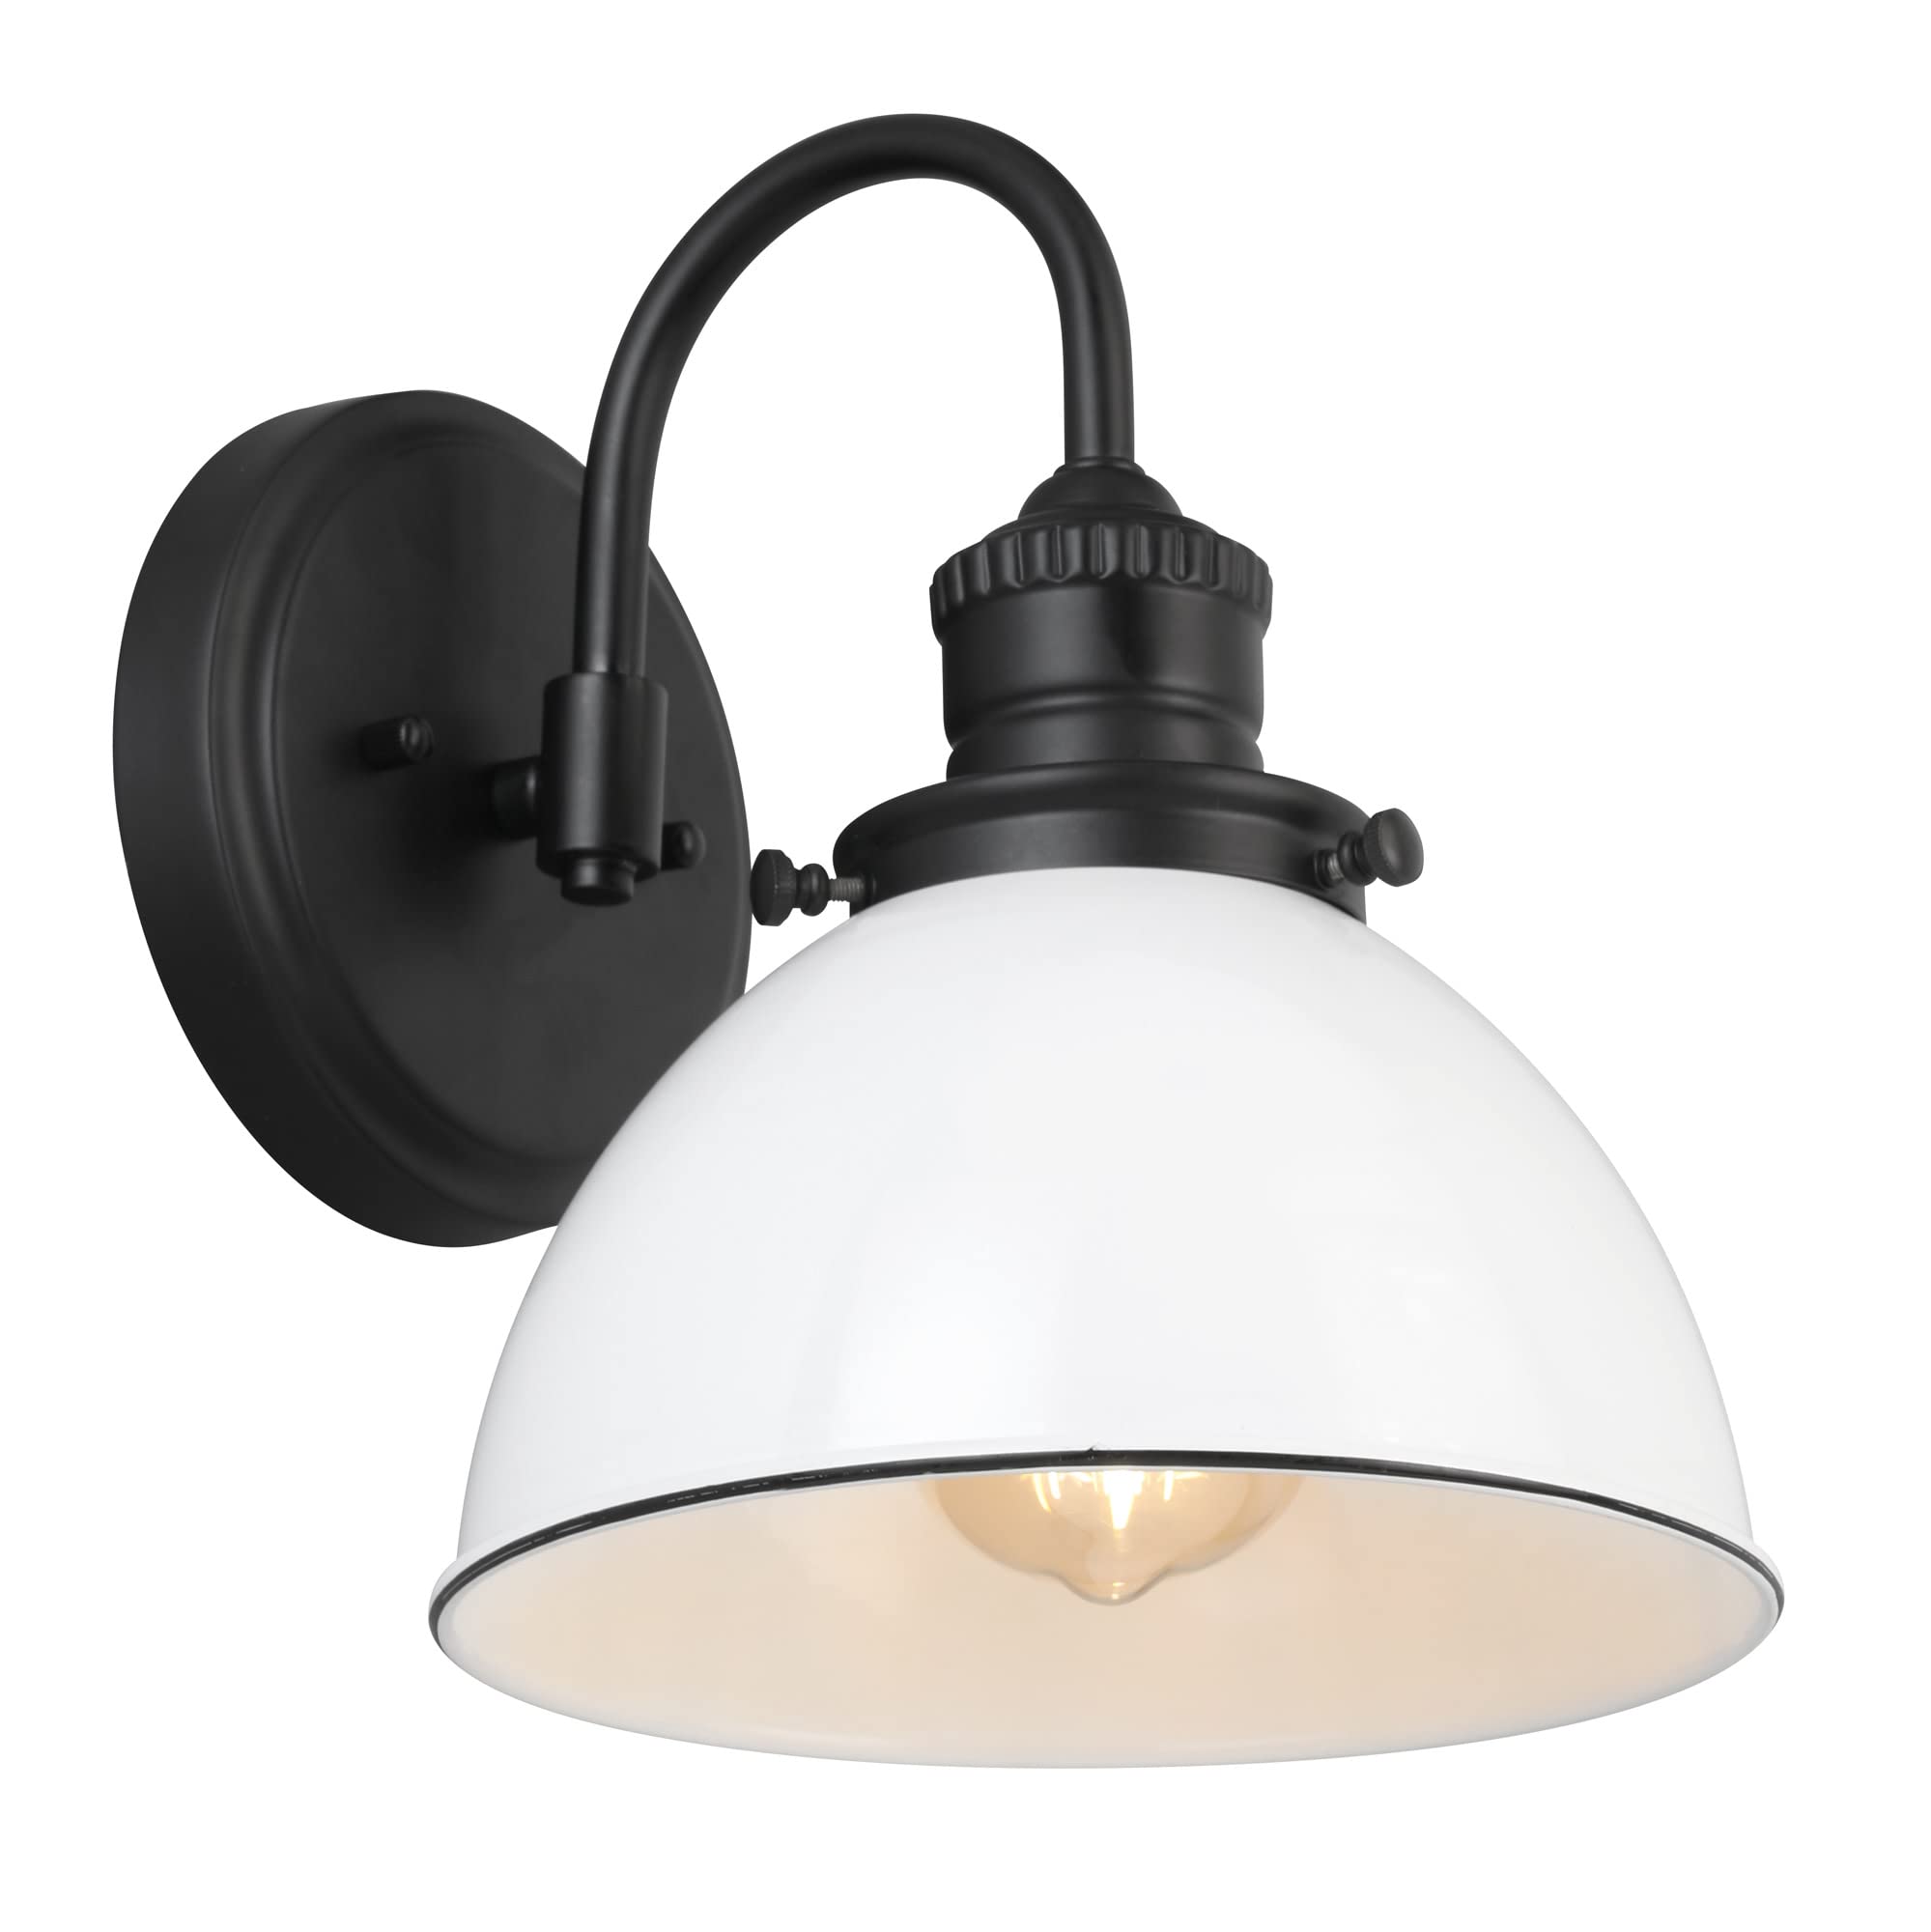 Design House 588293 Savannah Farmhouse 1-Light Indoor Dimmable Wall Light White Metal Shade for Hallway Foyer Kitchen, Matte Black